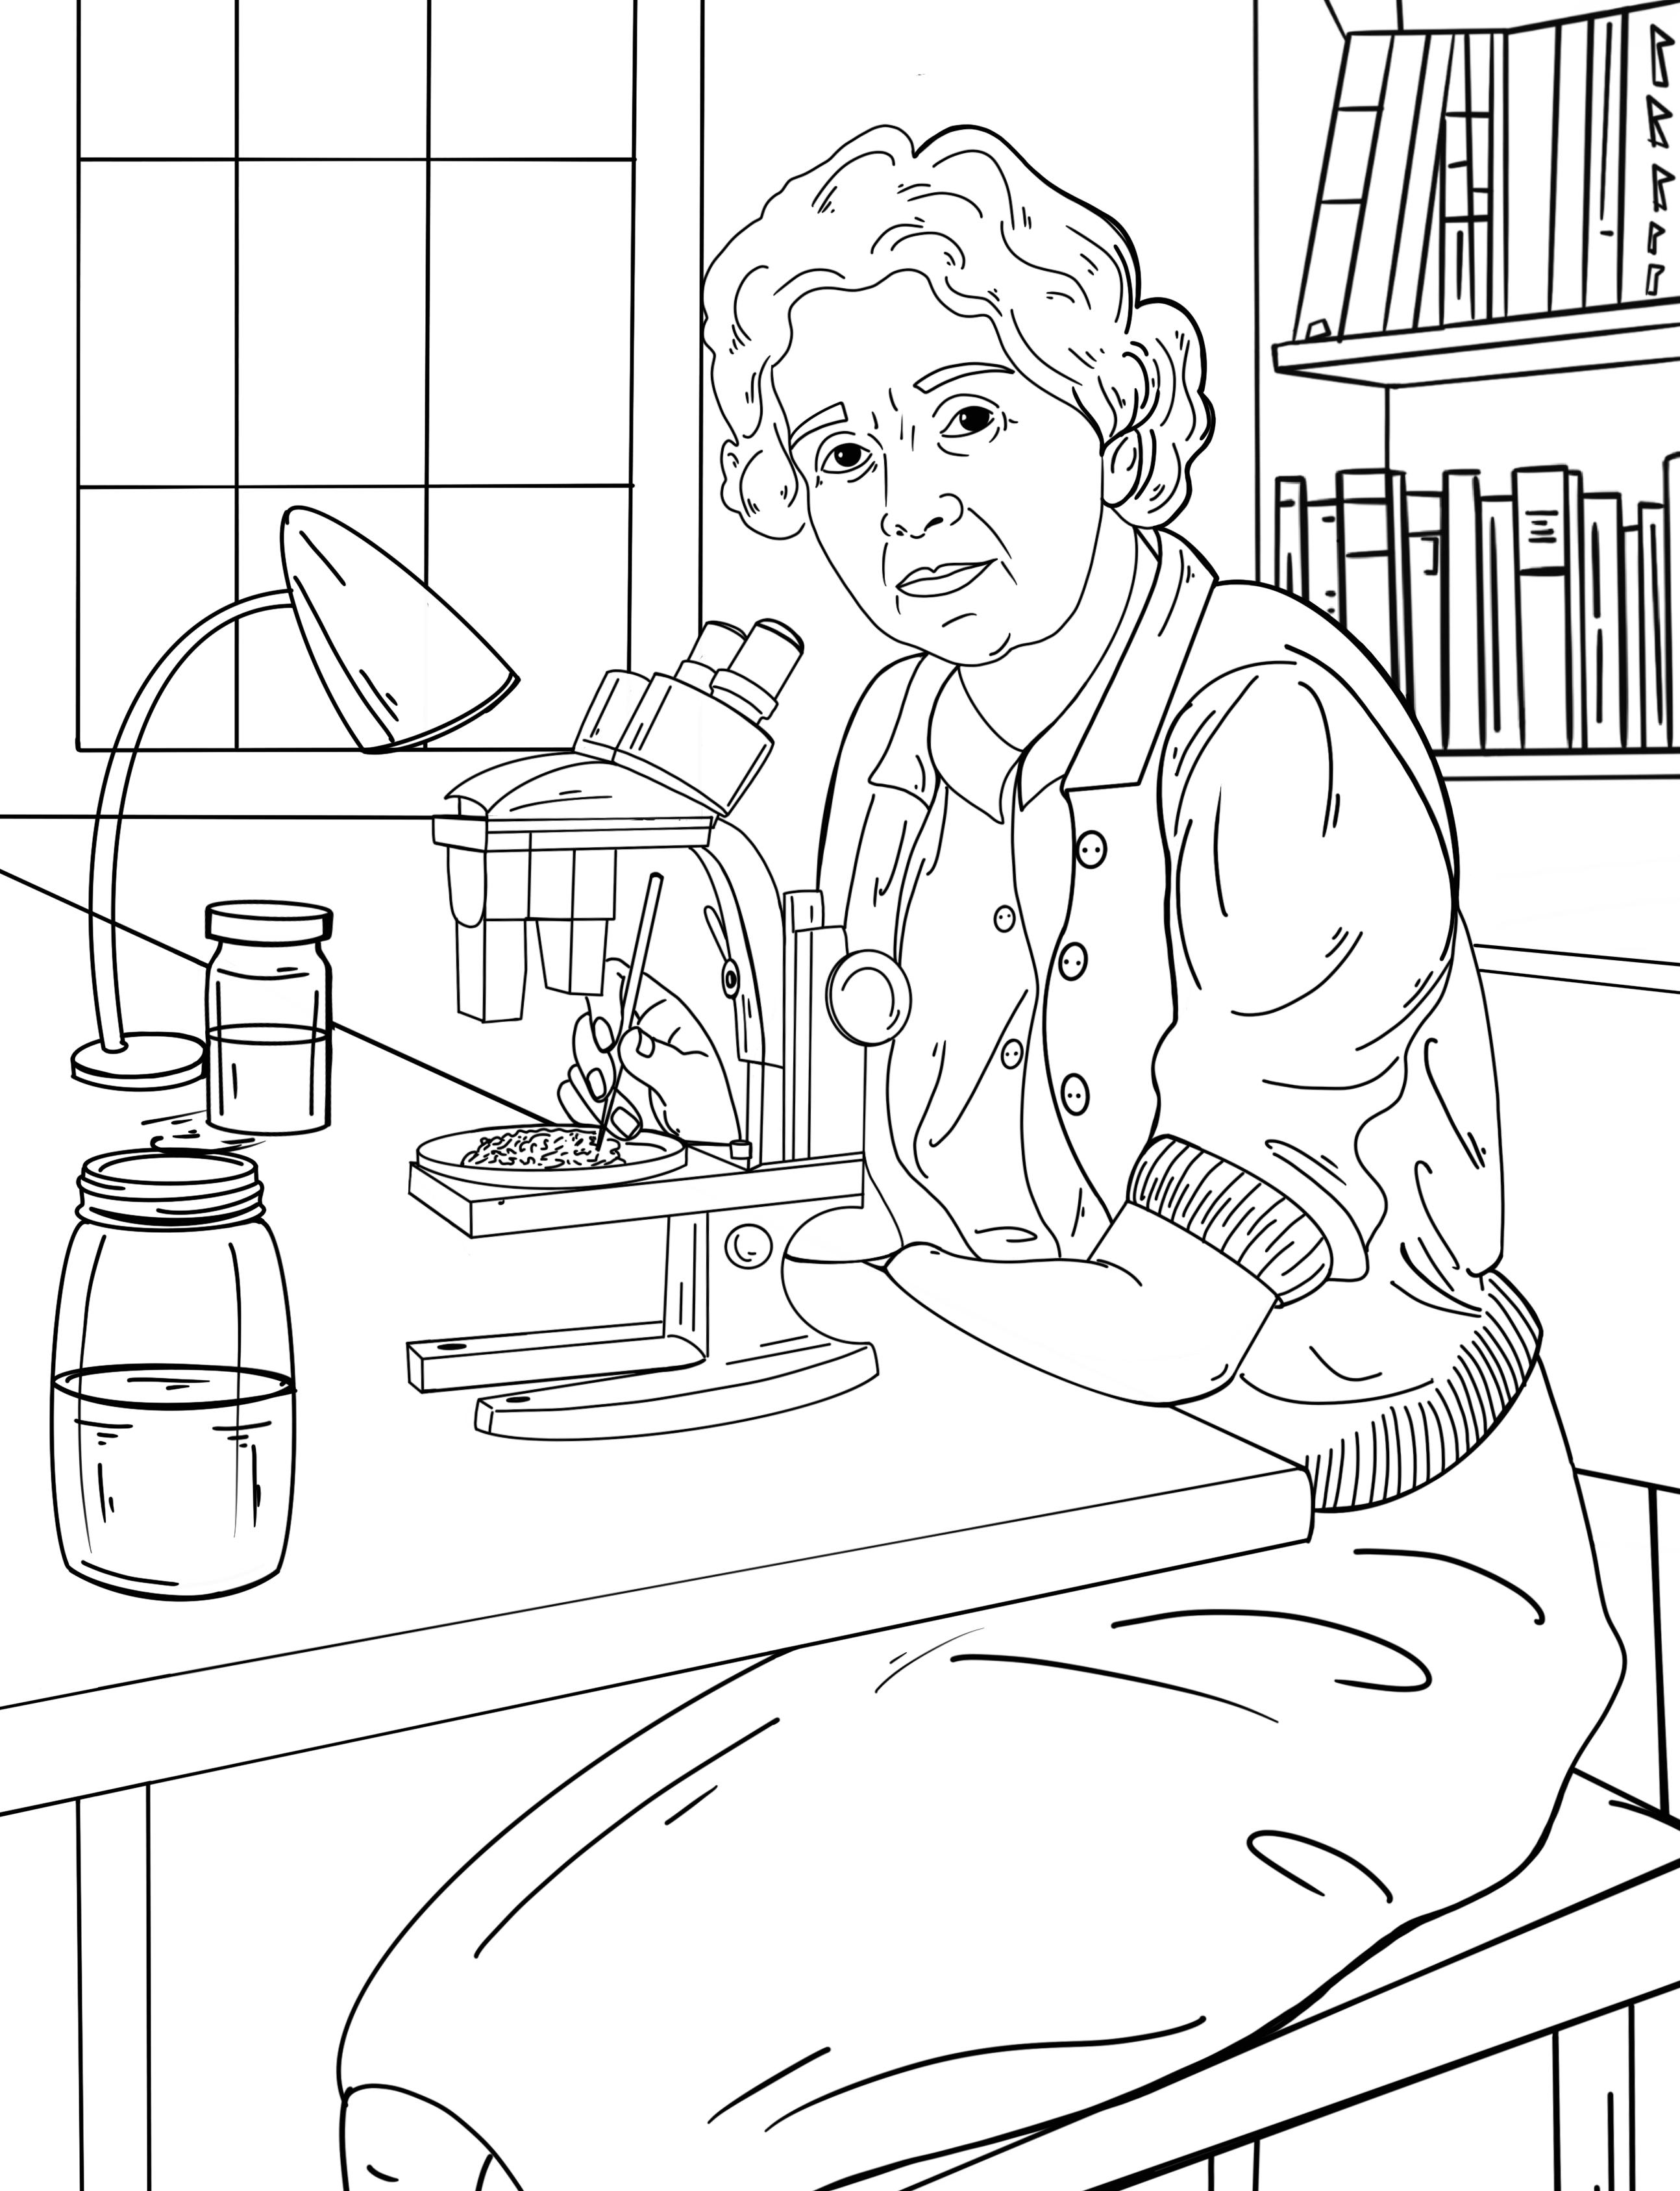 Women in Science Coloring Pages Archives | Trailblazing Women & LGBTQ Folks